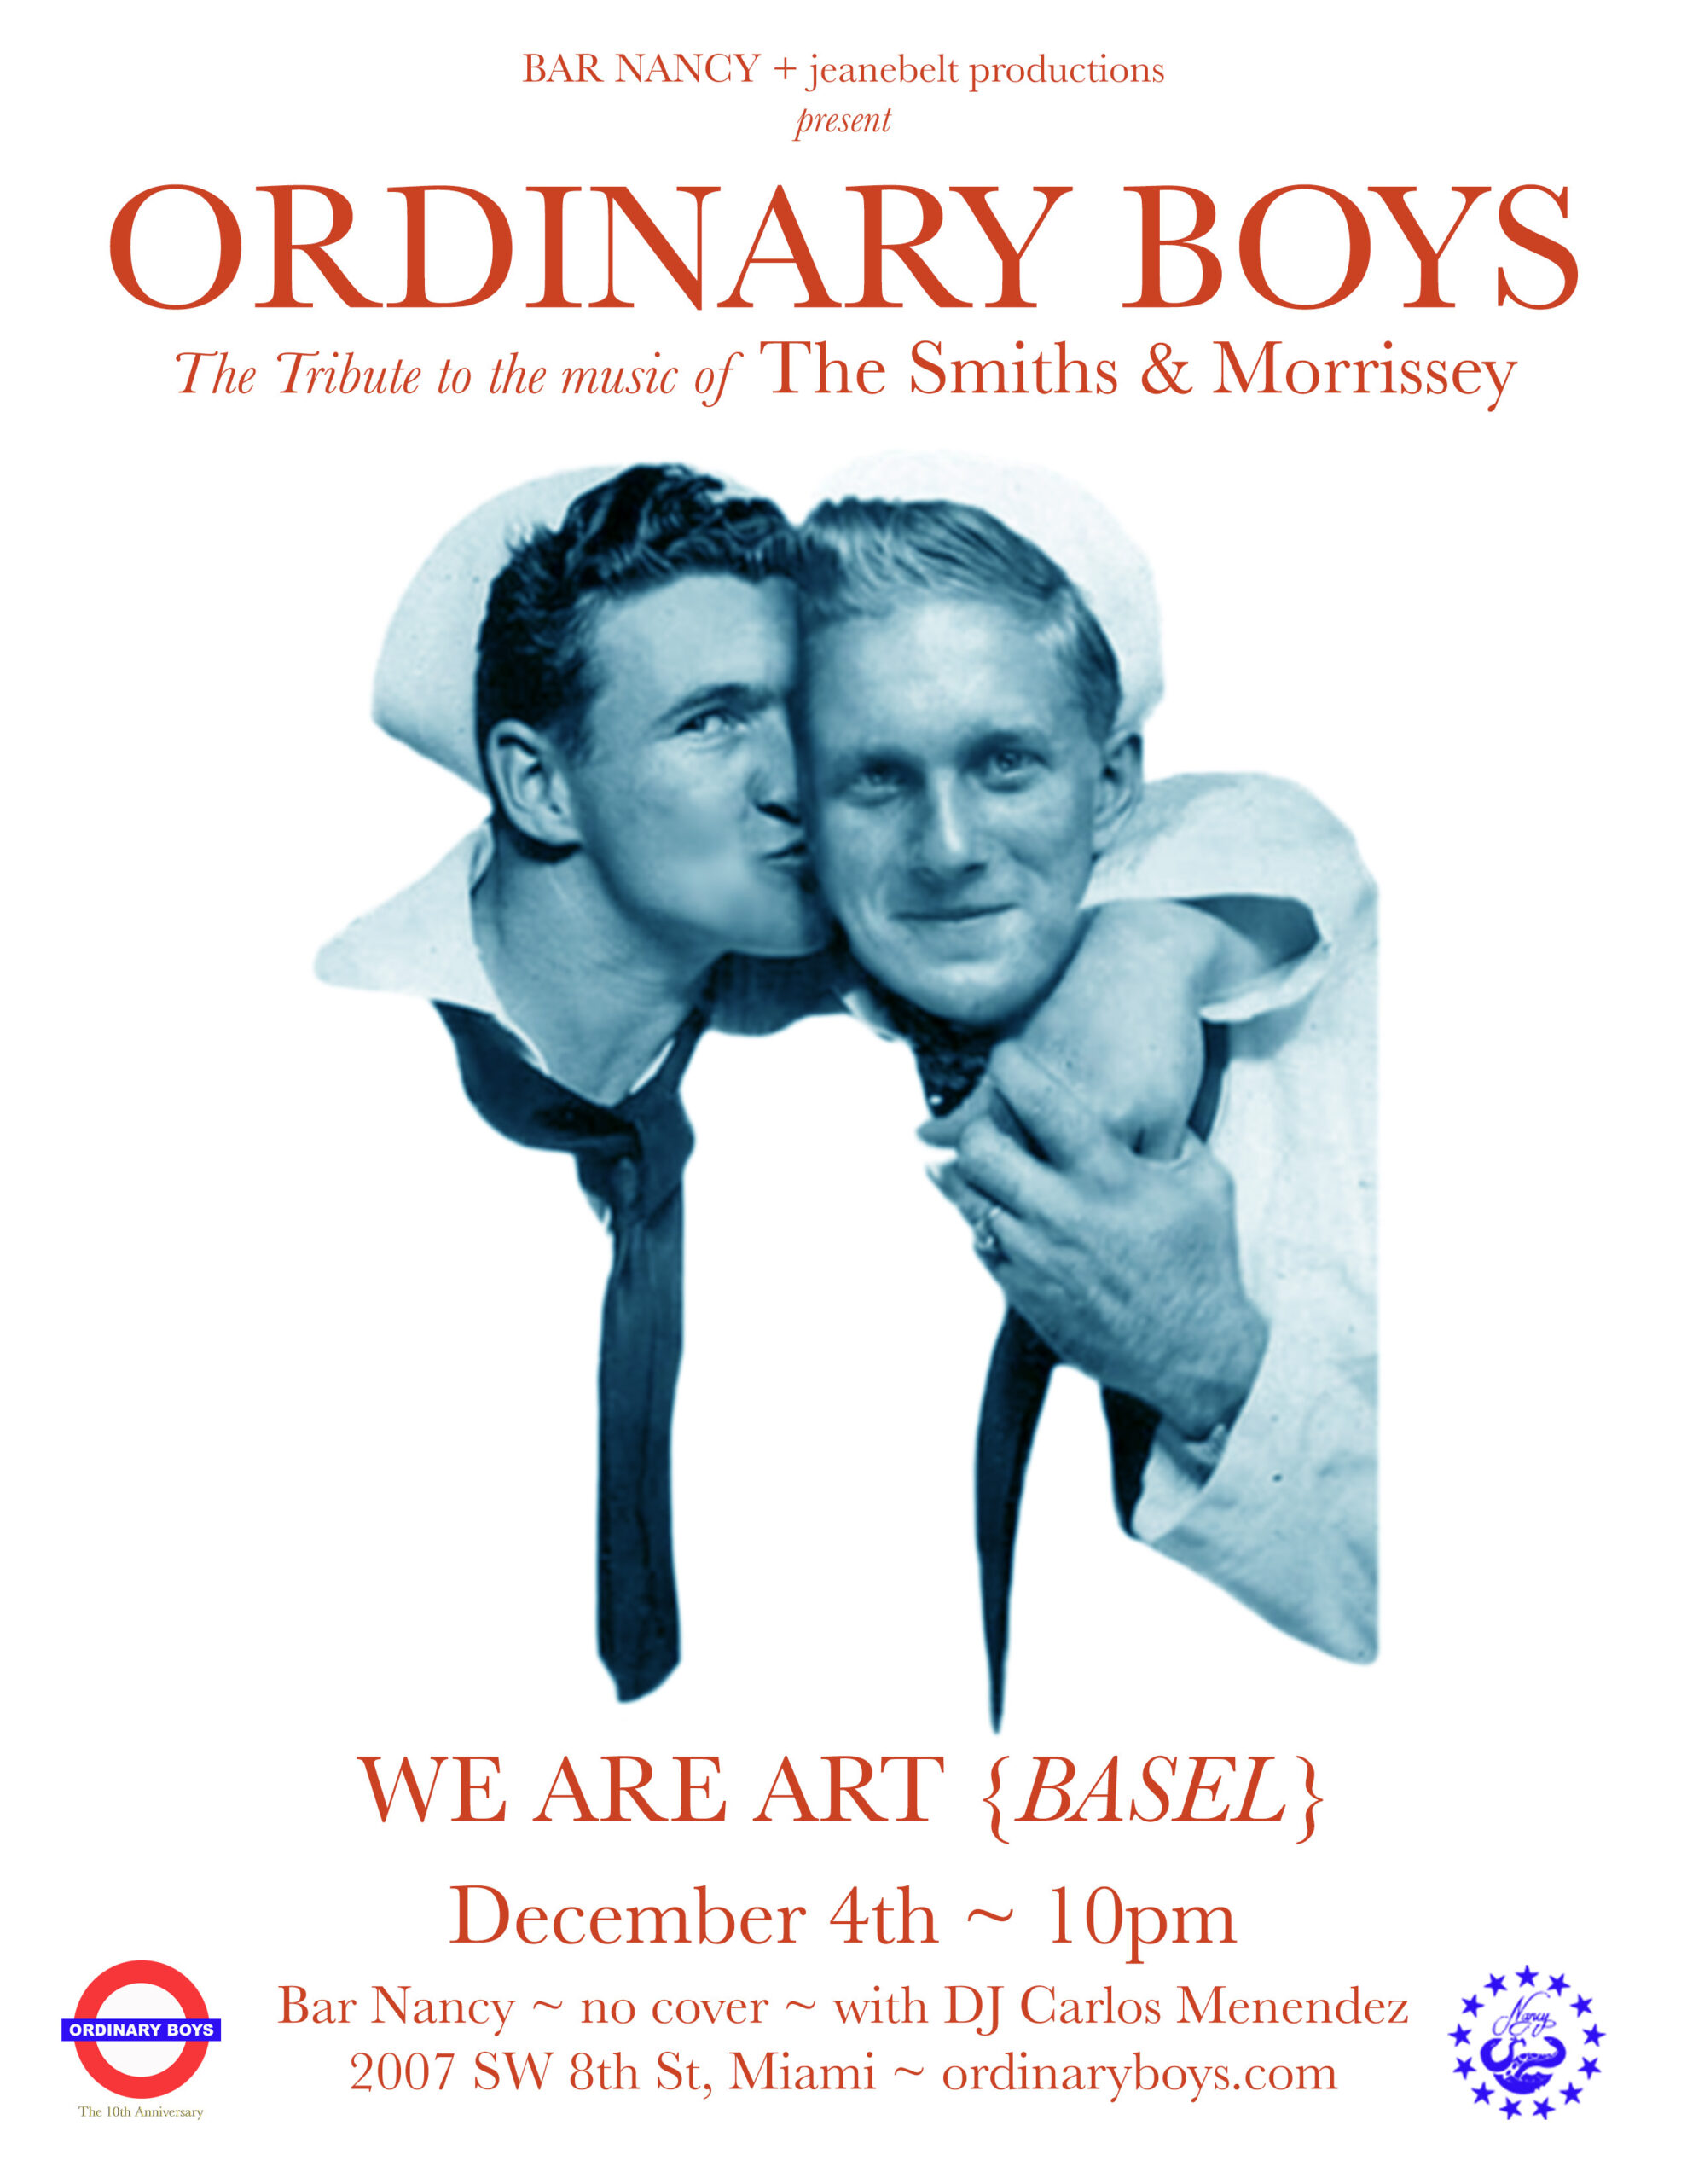 Ordinary Boys - The Tribute to the Music of The Smith & Morrissey at Bar Nancy